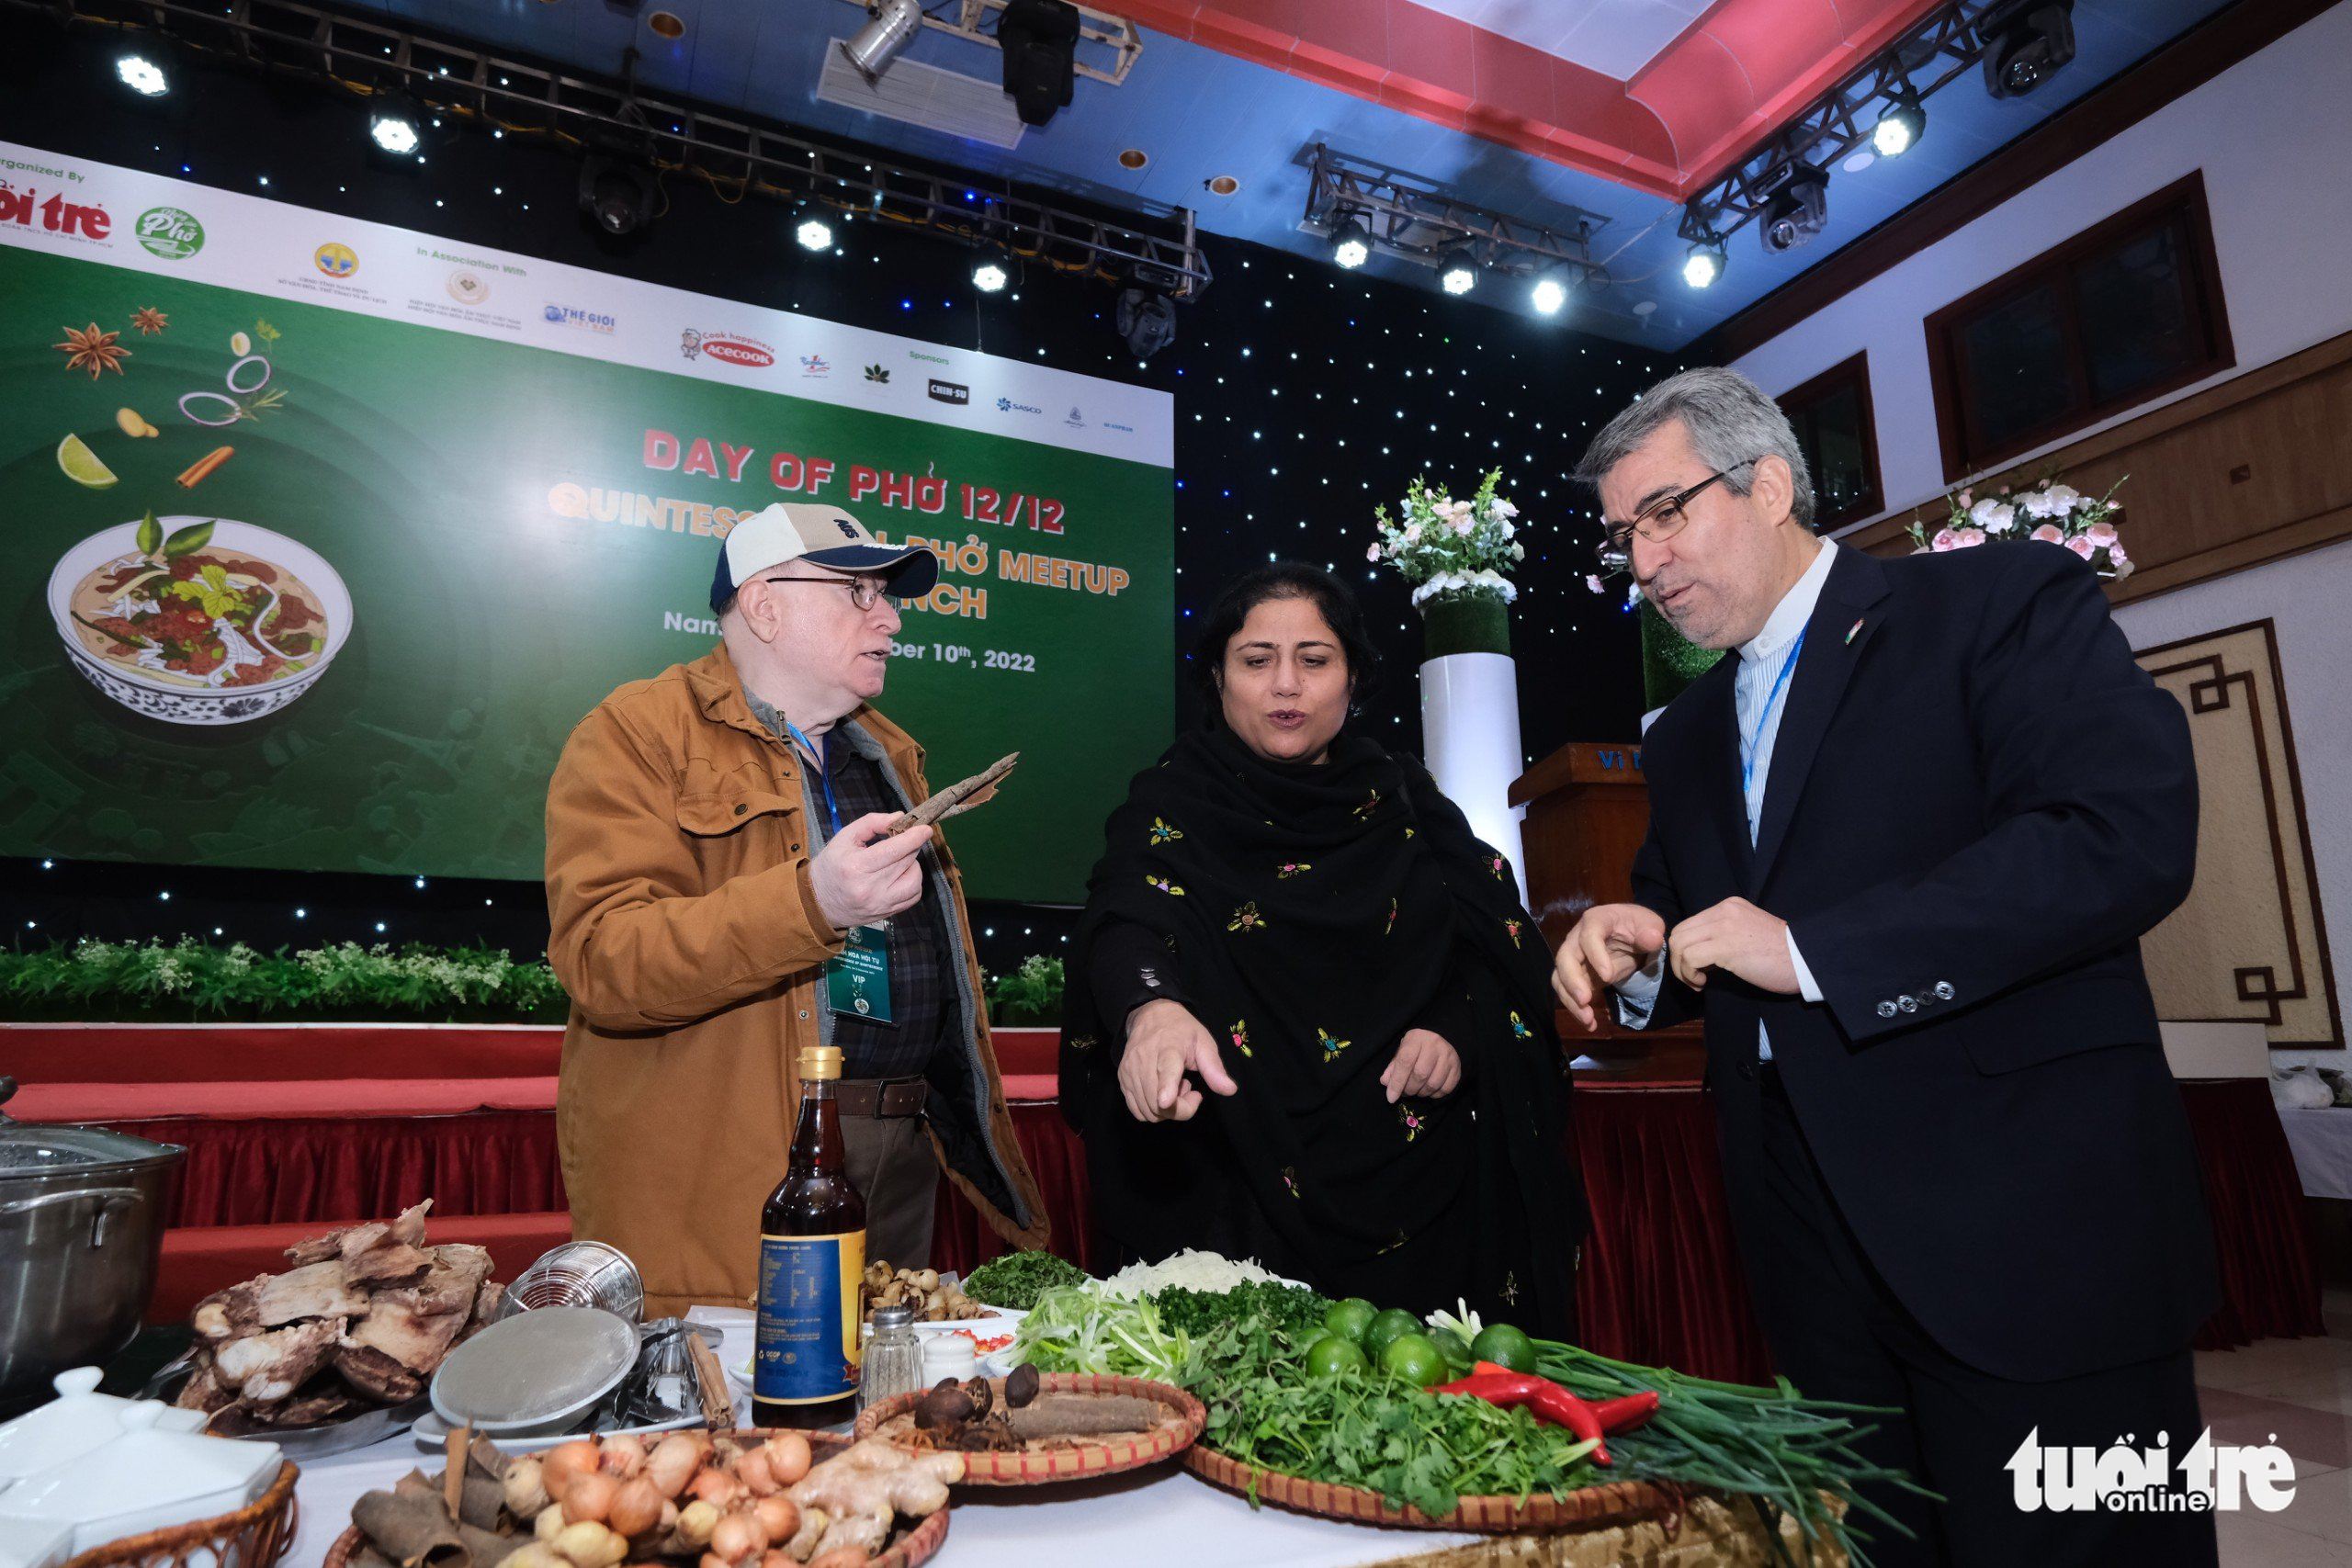 Pakistani Ambassador to Vietnam Samina Mehtab (C), her husband (L), and Iranian Ambassador to Vietnam Ali Akbar Nazari learn about ingredients to cook pho at the Day of Pho event organized by Tuoi Tre (Youth) newspaper in Nam Dinh Province, Vietnam, December 10, 2022. Photo: Nam Tran / Tuoi Tre